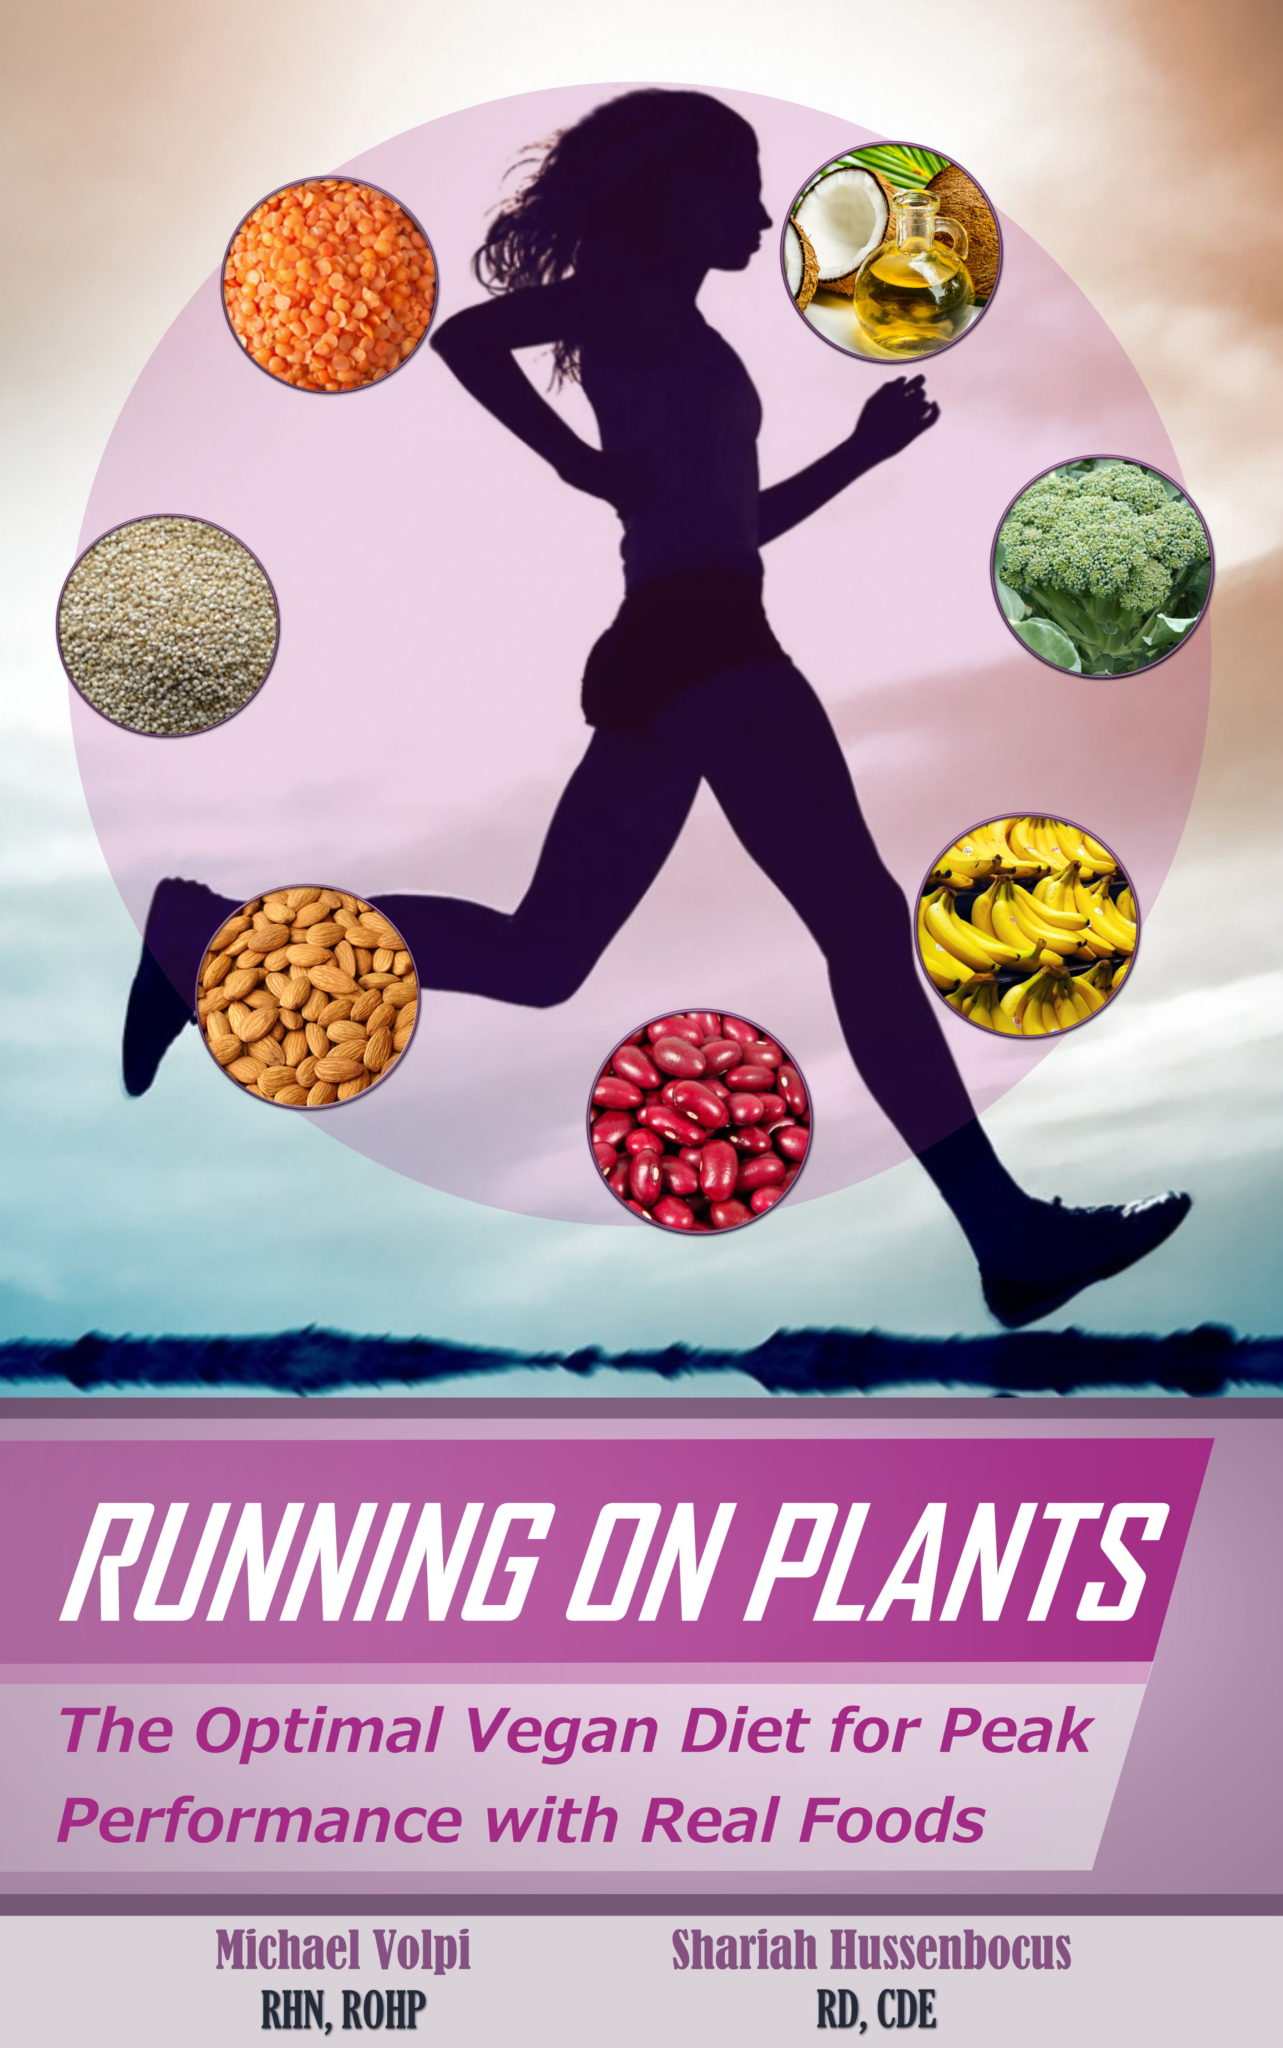 Running on Plants: The Optimal Vegan Diet for Peak Performance with Real Foods by Michael Volpi